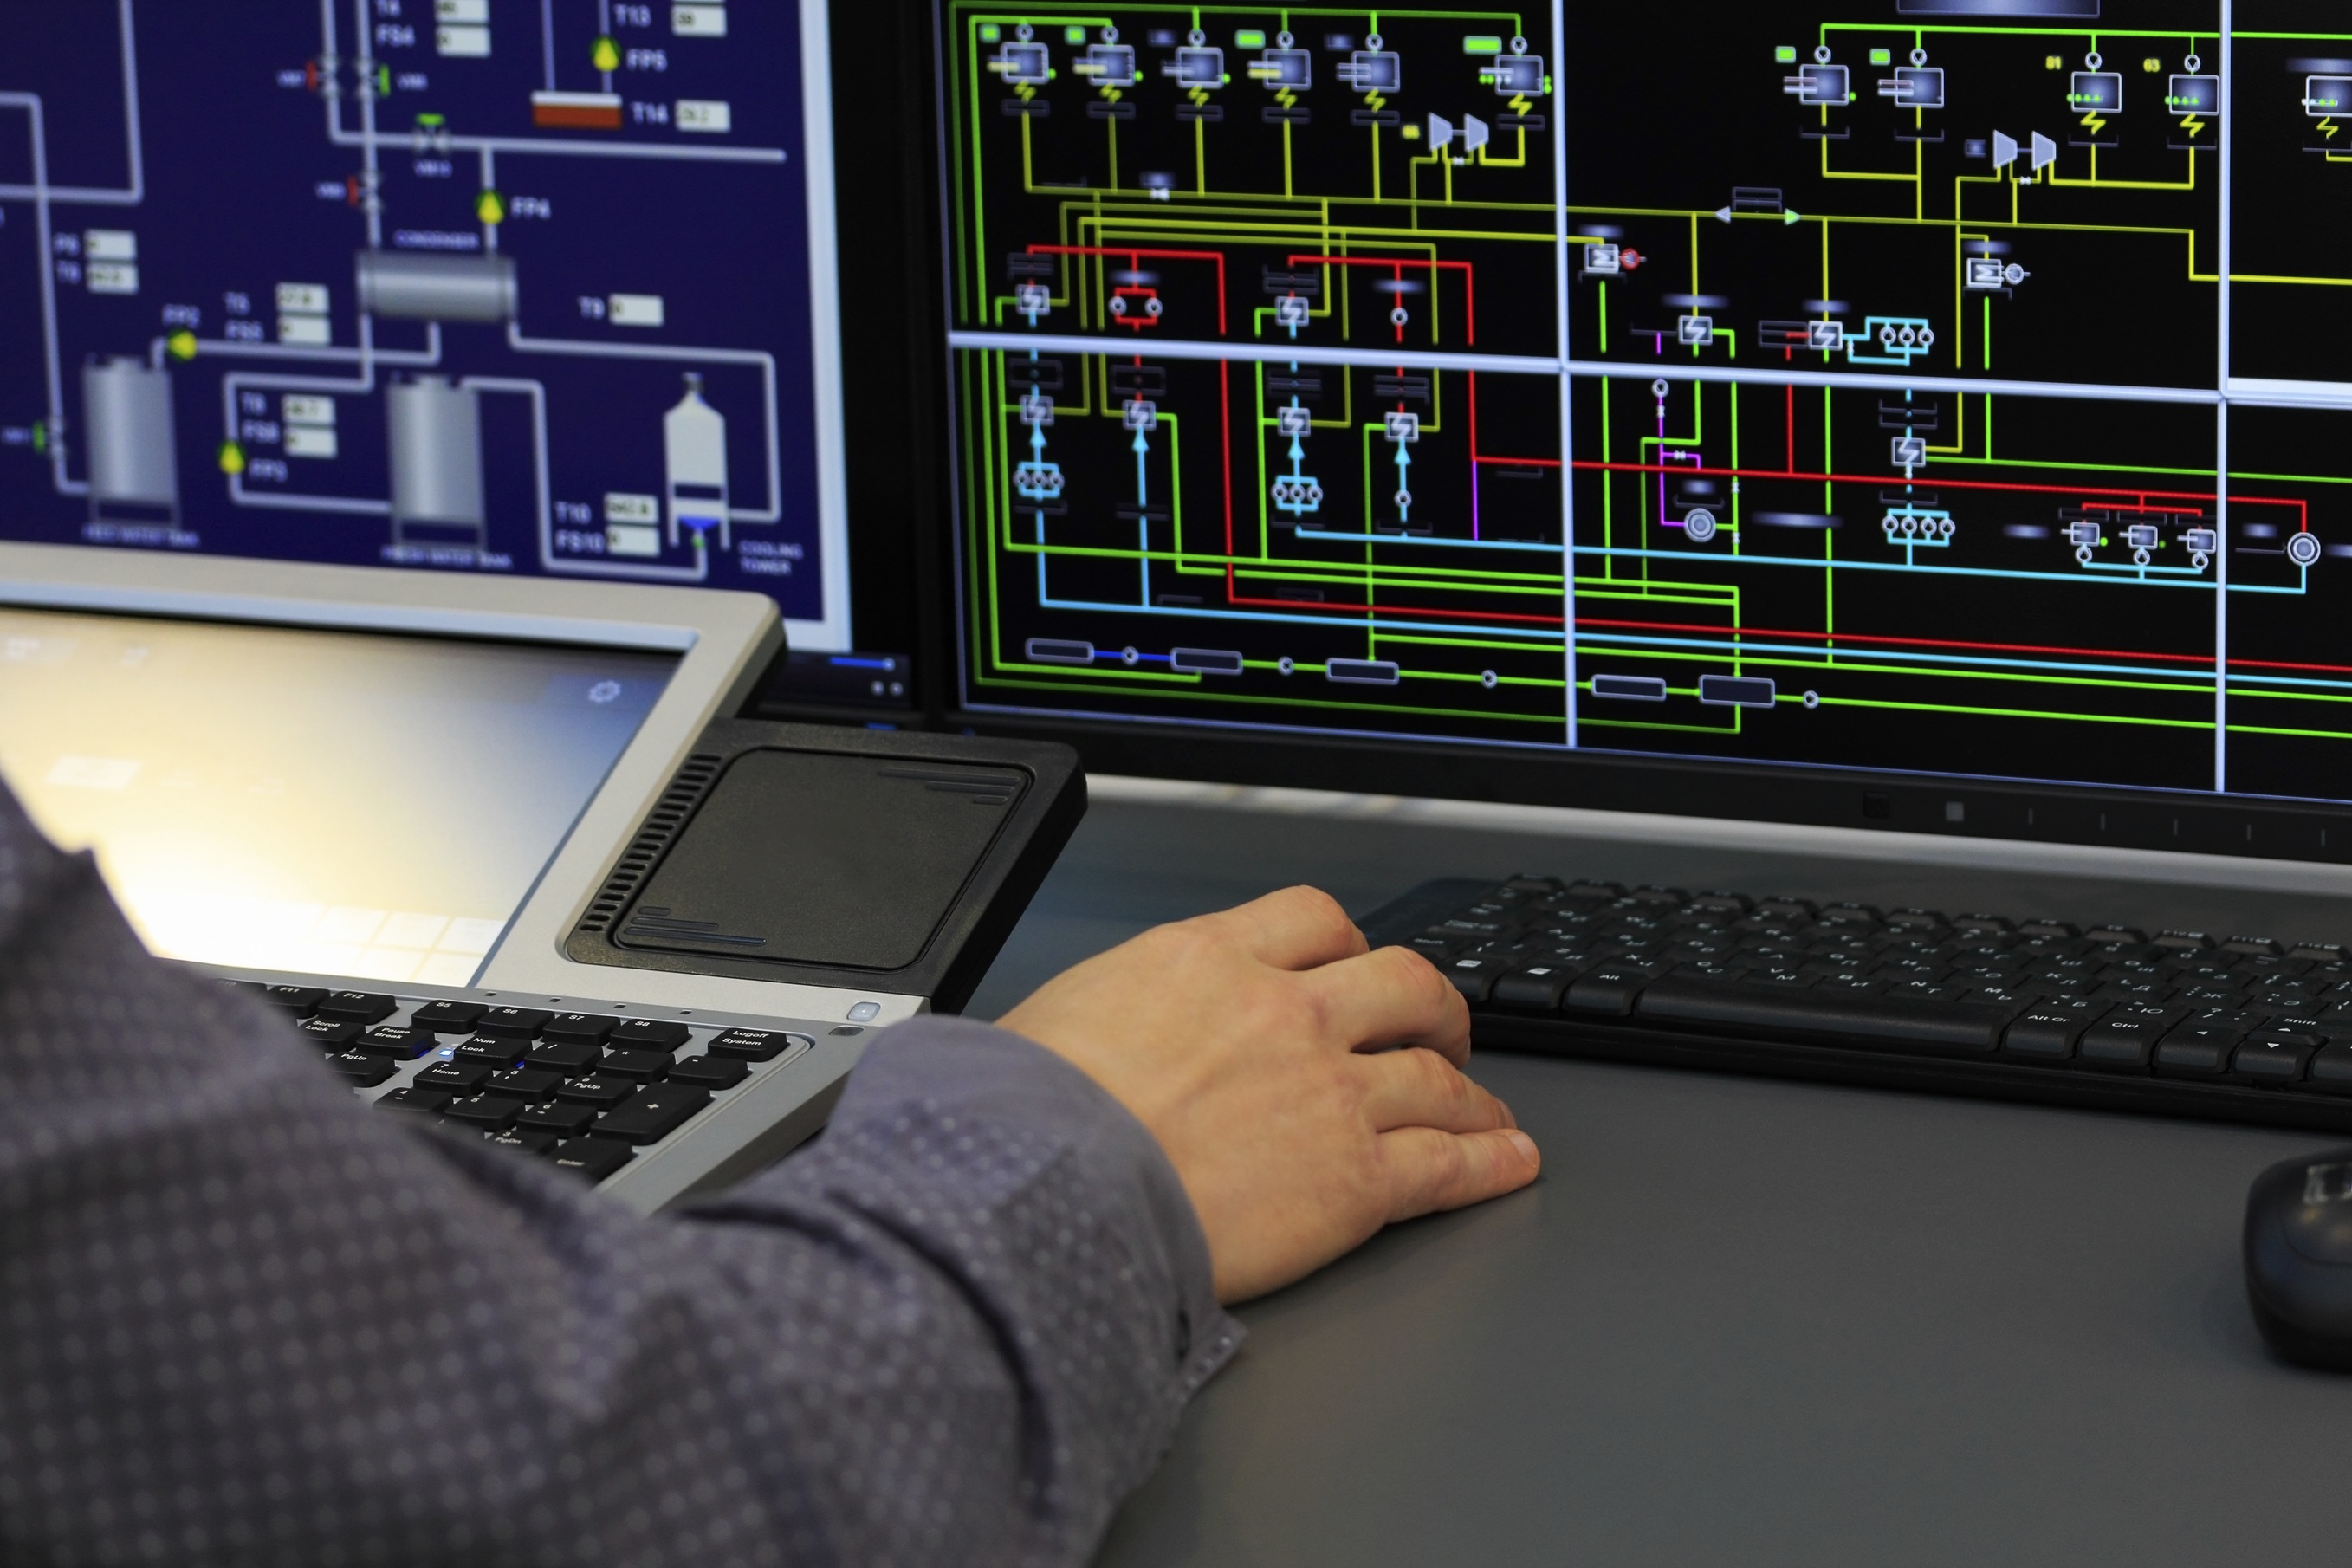 Remote monitoring is crucial for mission critical systems like central utility plants.